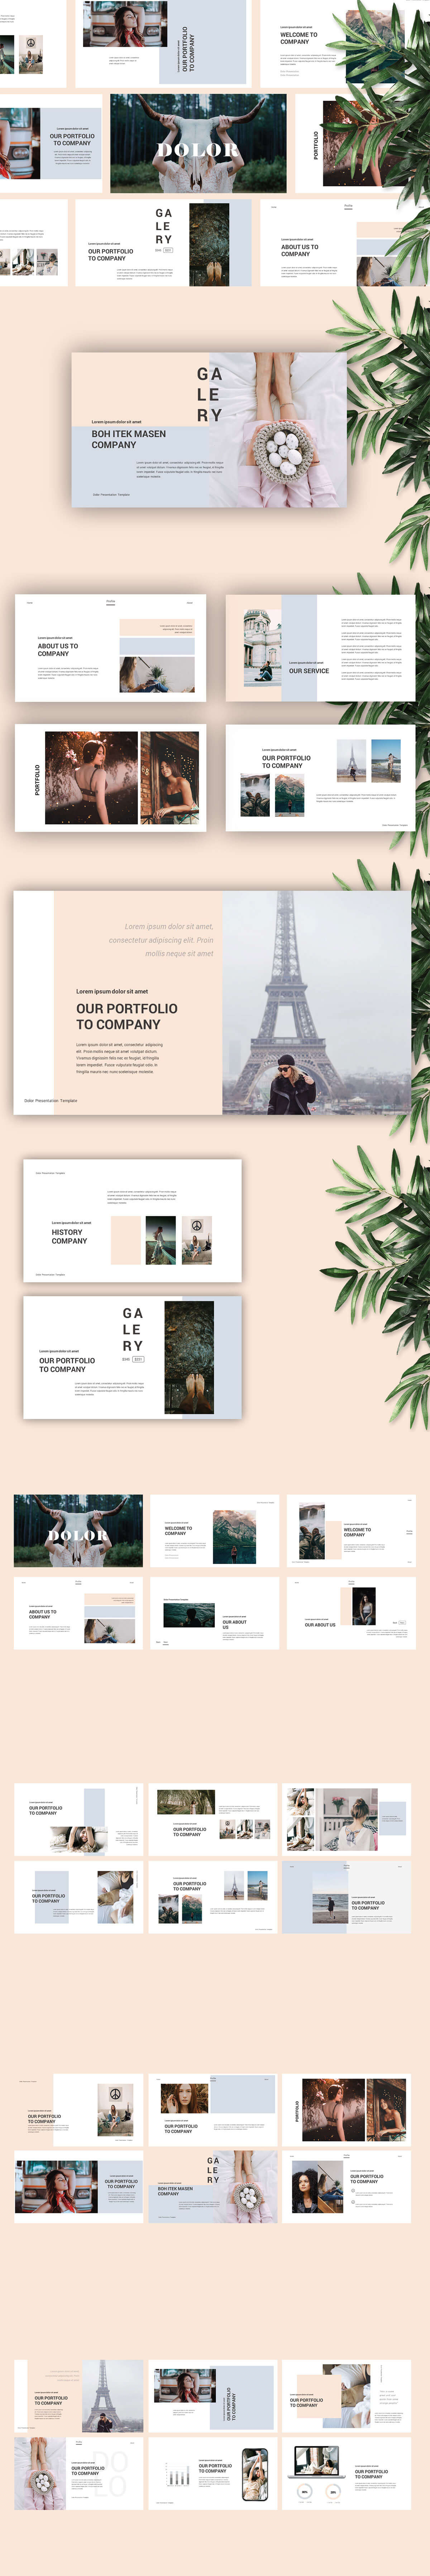 Download Free Blog Grid Page 78 Of 337 PSD Mockup Template